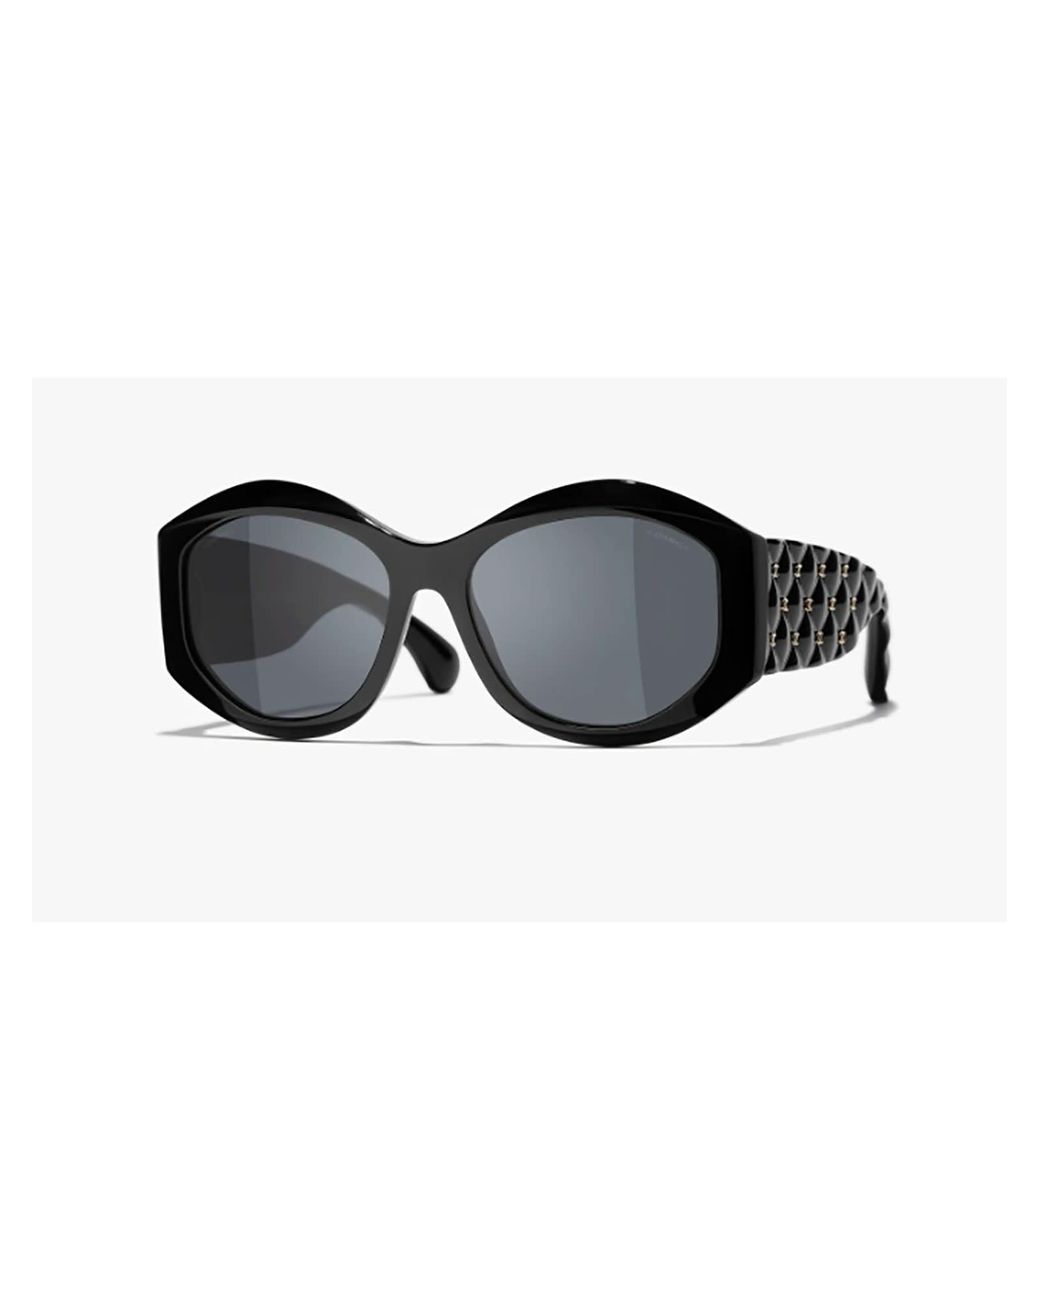 Chanel First Copy Sunglasses | First Copy Sunglasses